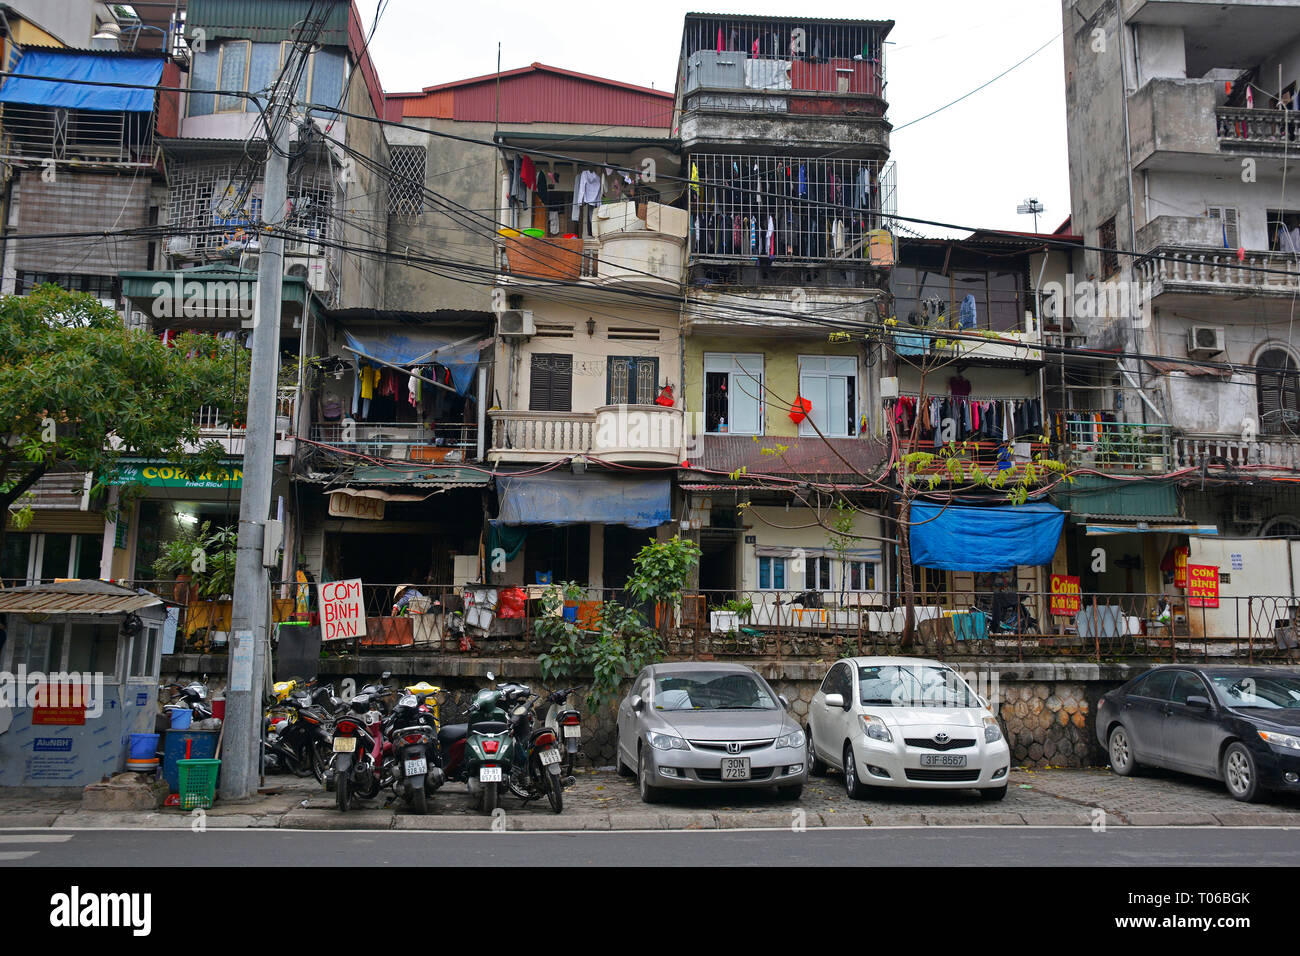 Hanoi, Vietnam - 14th December 2017. Houses on a residential street which is often referred to as Train Street in central Hanoi which has grown up aro Stock Photo